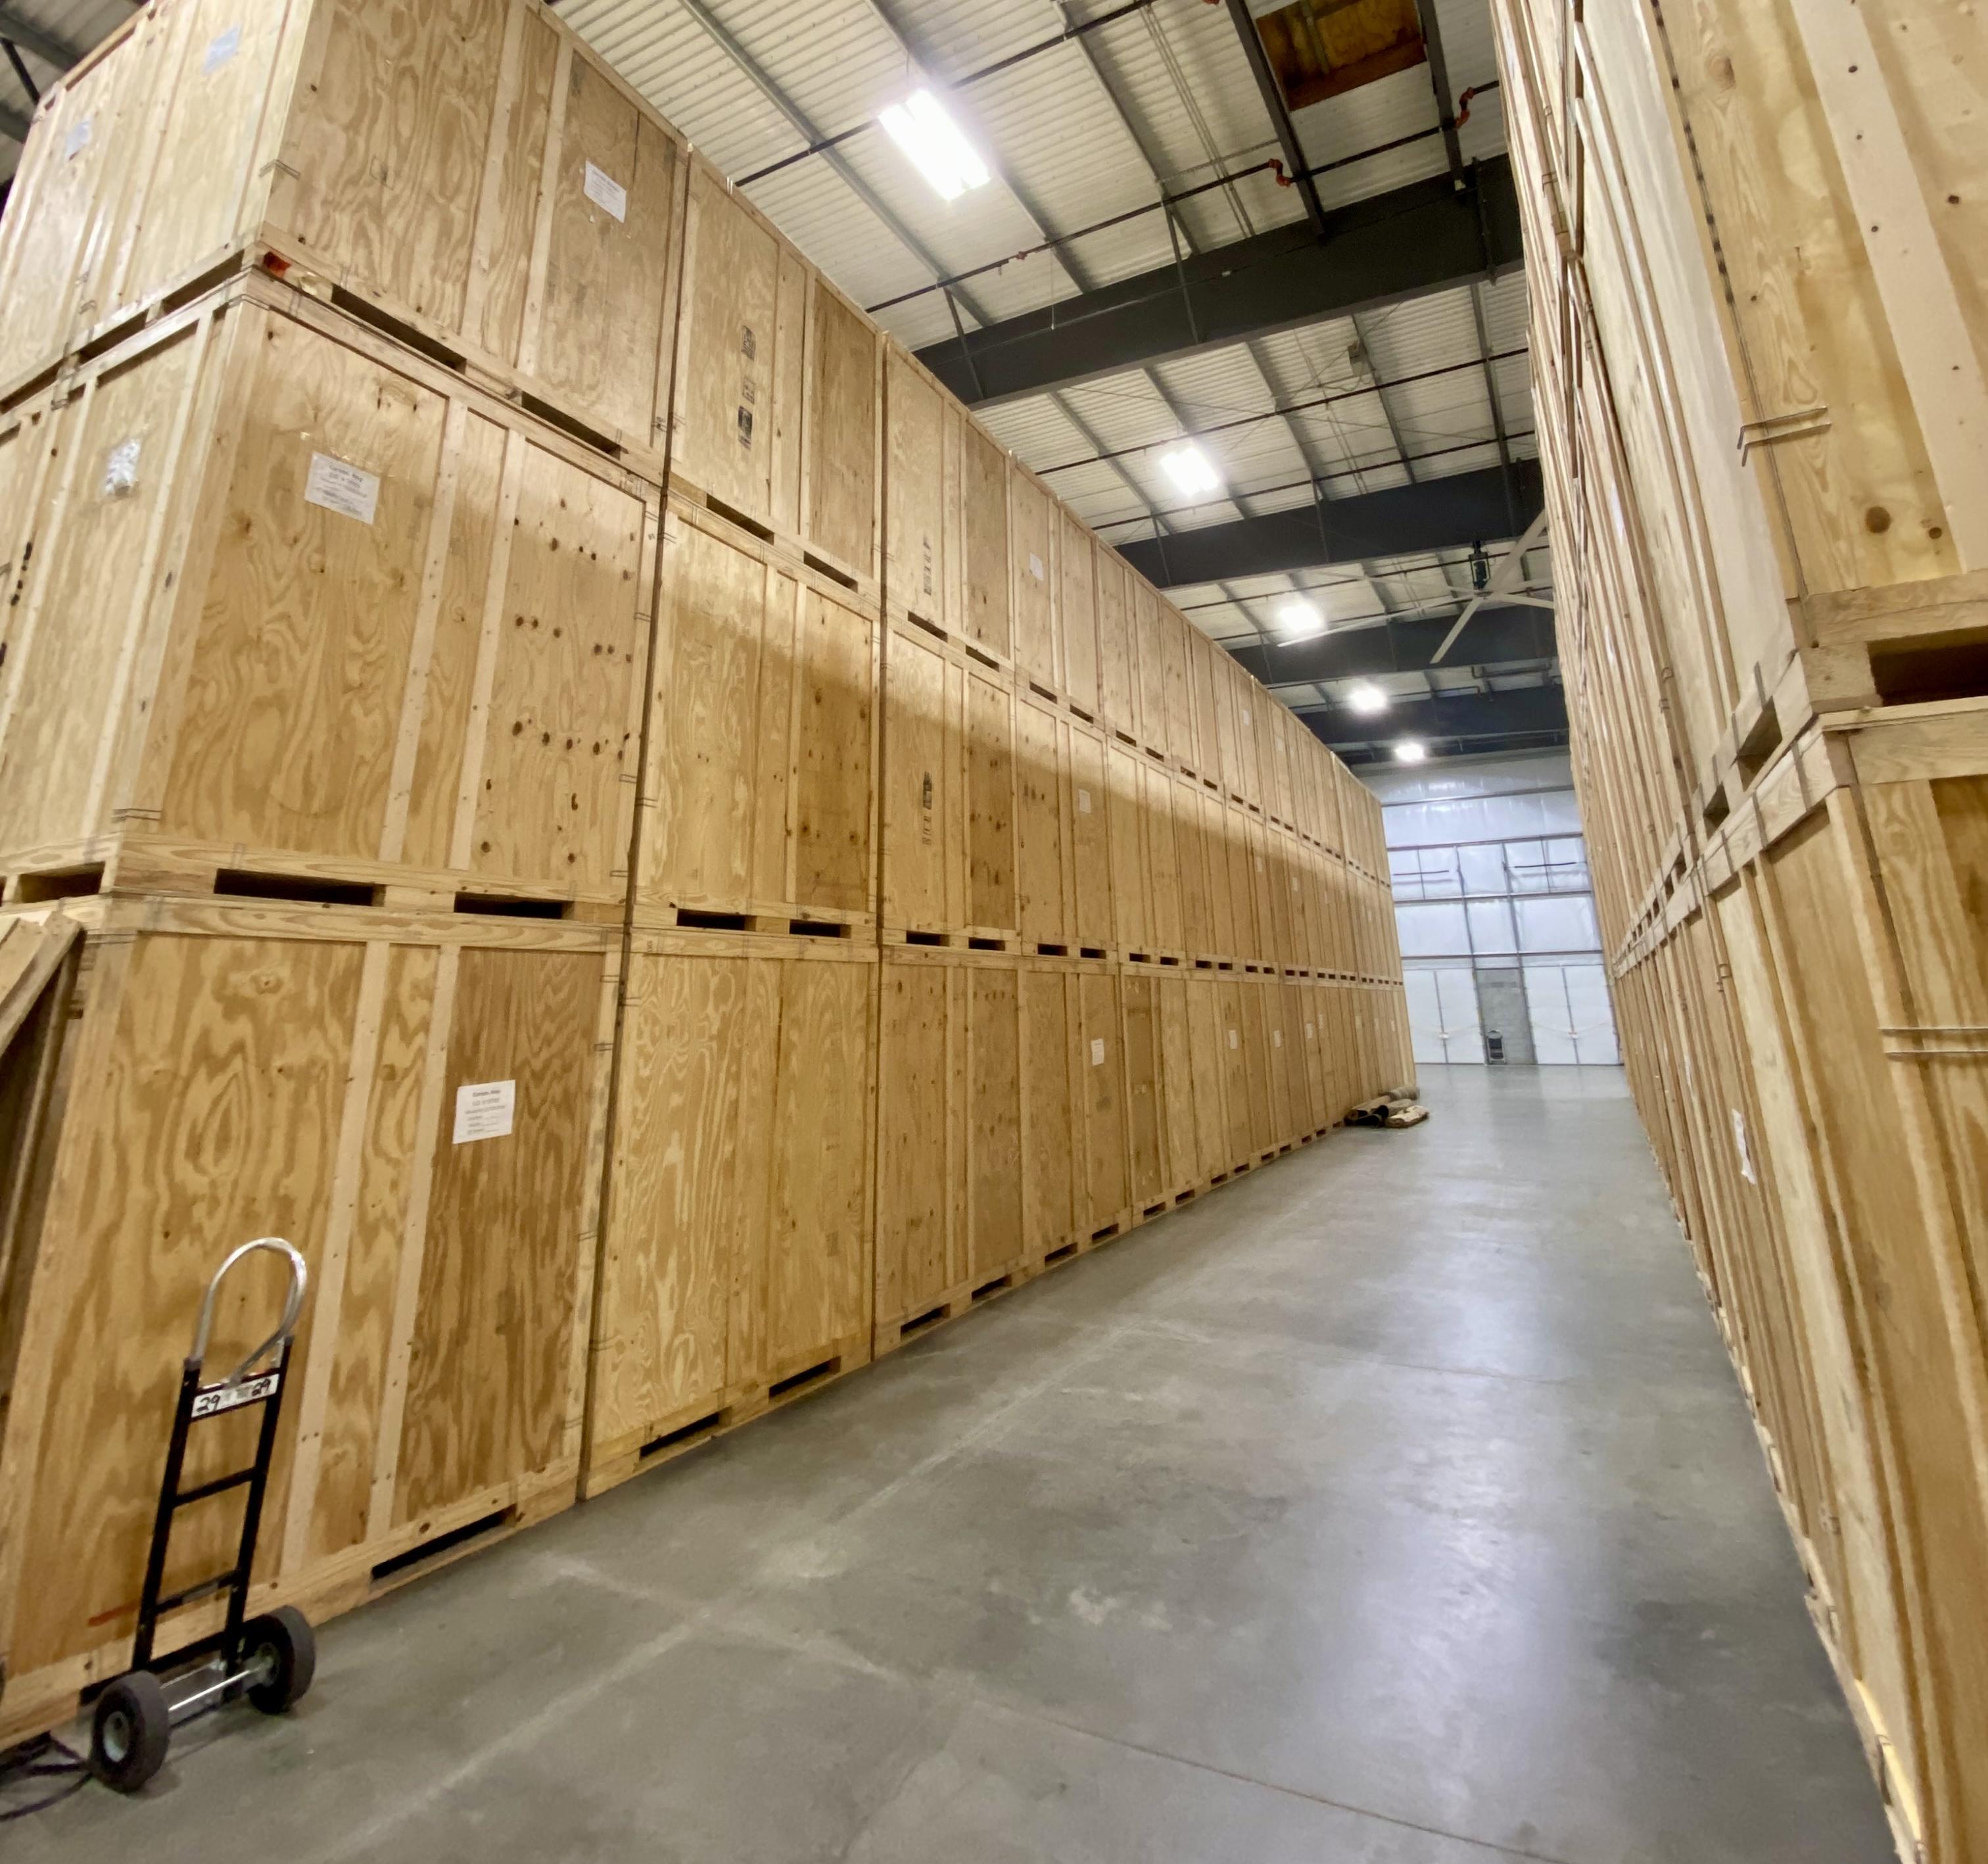 Storage warehouse with crates stacked in an organized manner